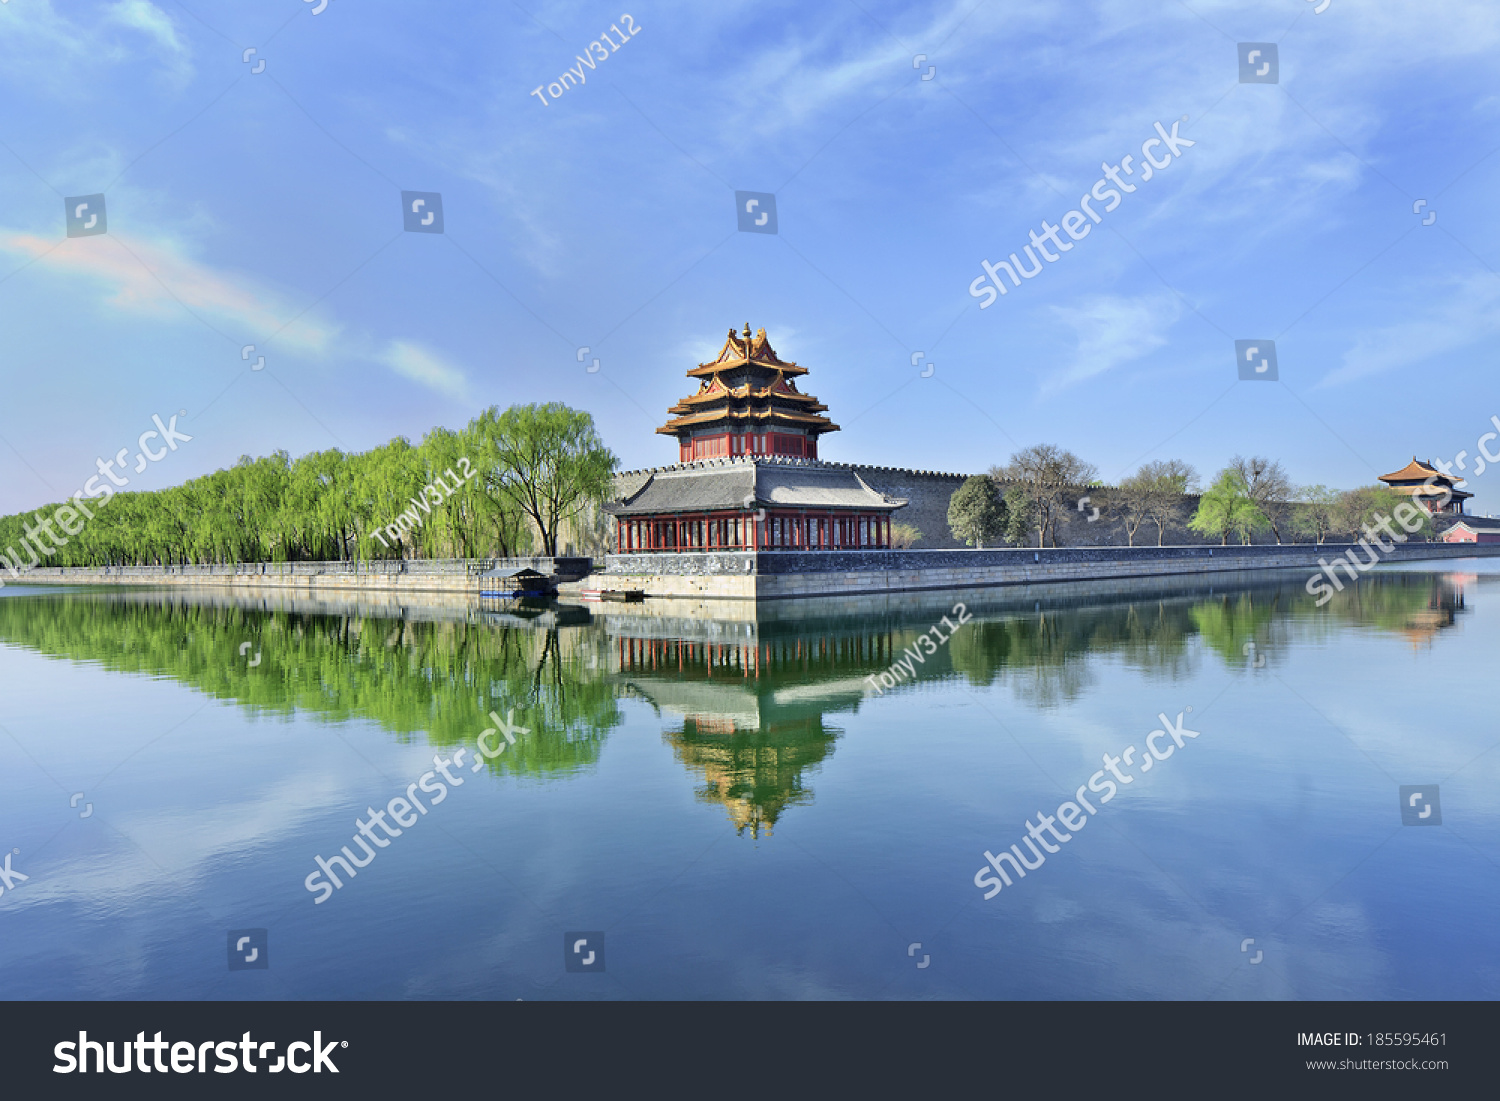 World Heritage Site Beijing Forbidden City reflected in its canal. #185595461